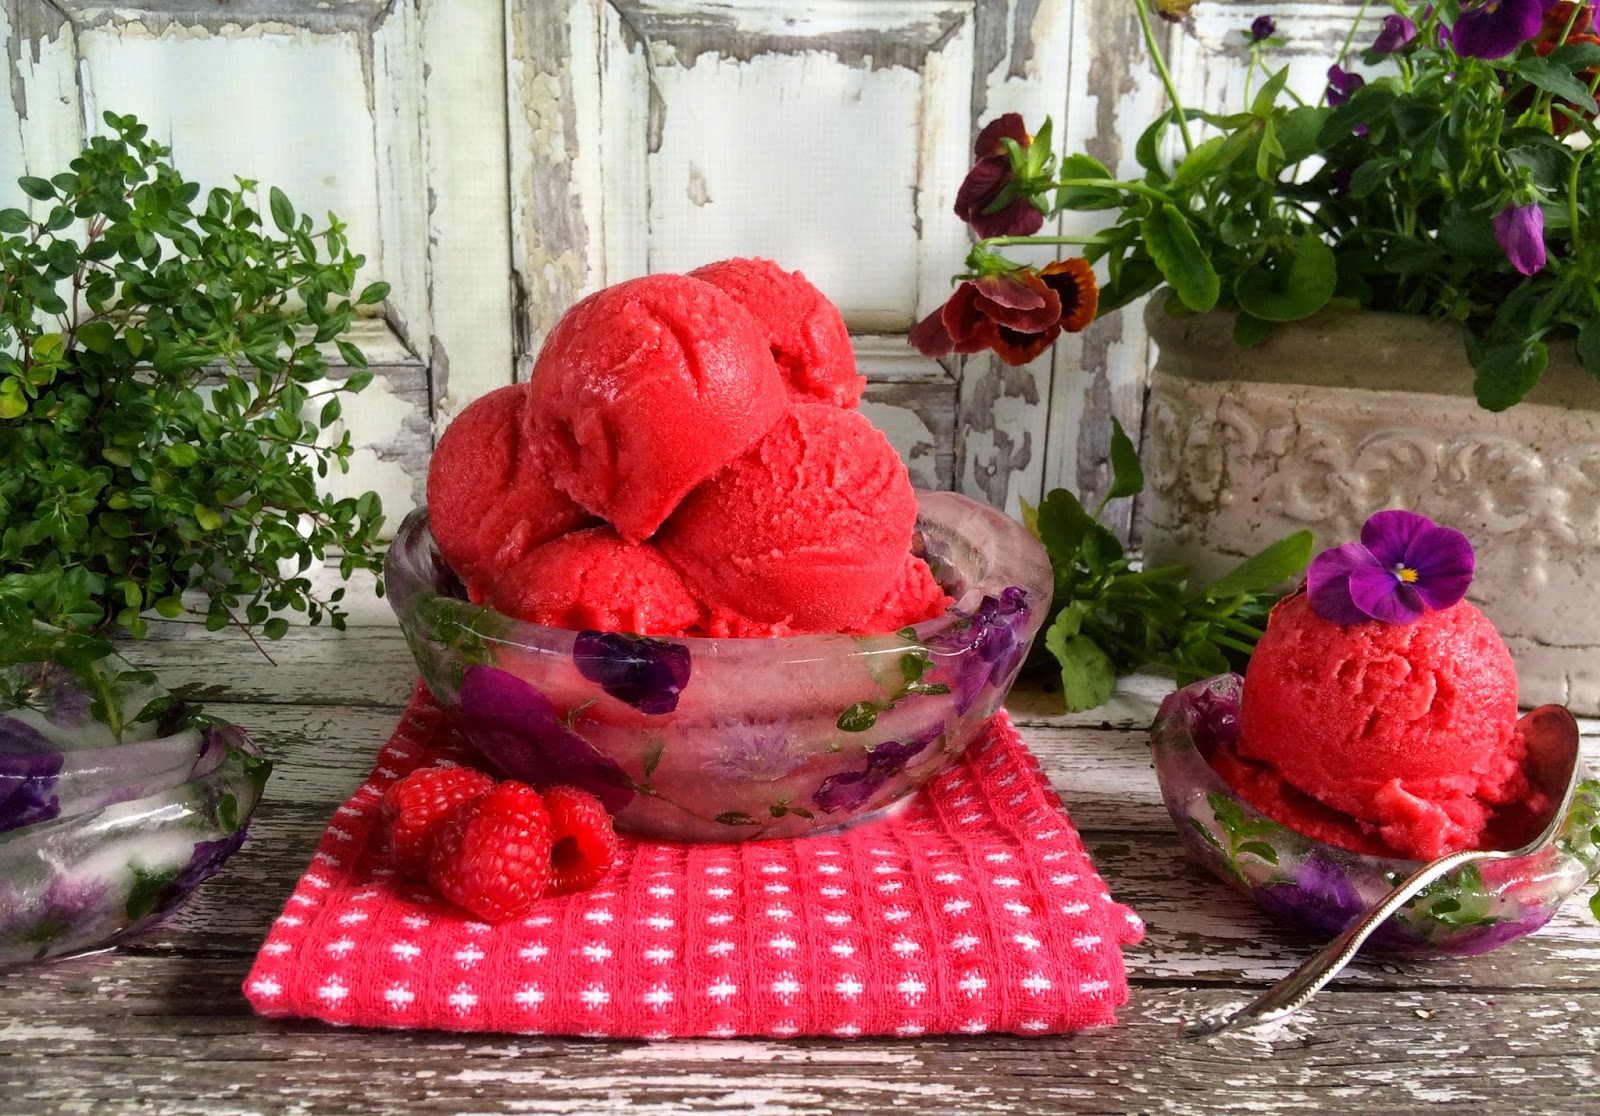 Raspberry Rose Sorbet in Floral Ice Bowls via Butter Basil & Breadcrumbs for thefrugalfoodiemama.com